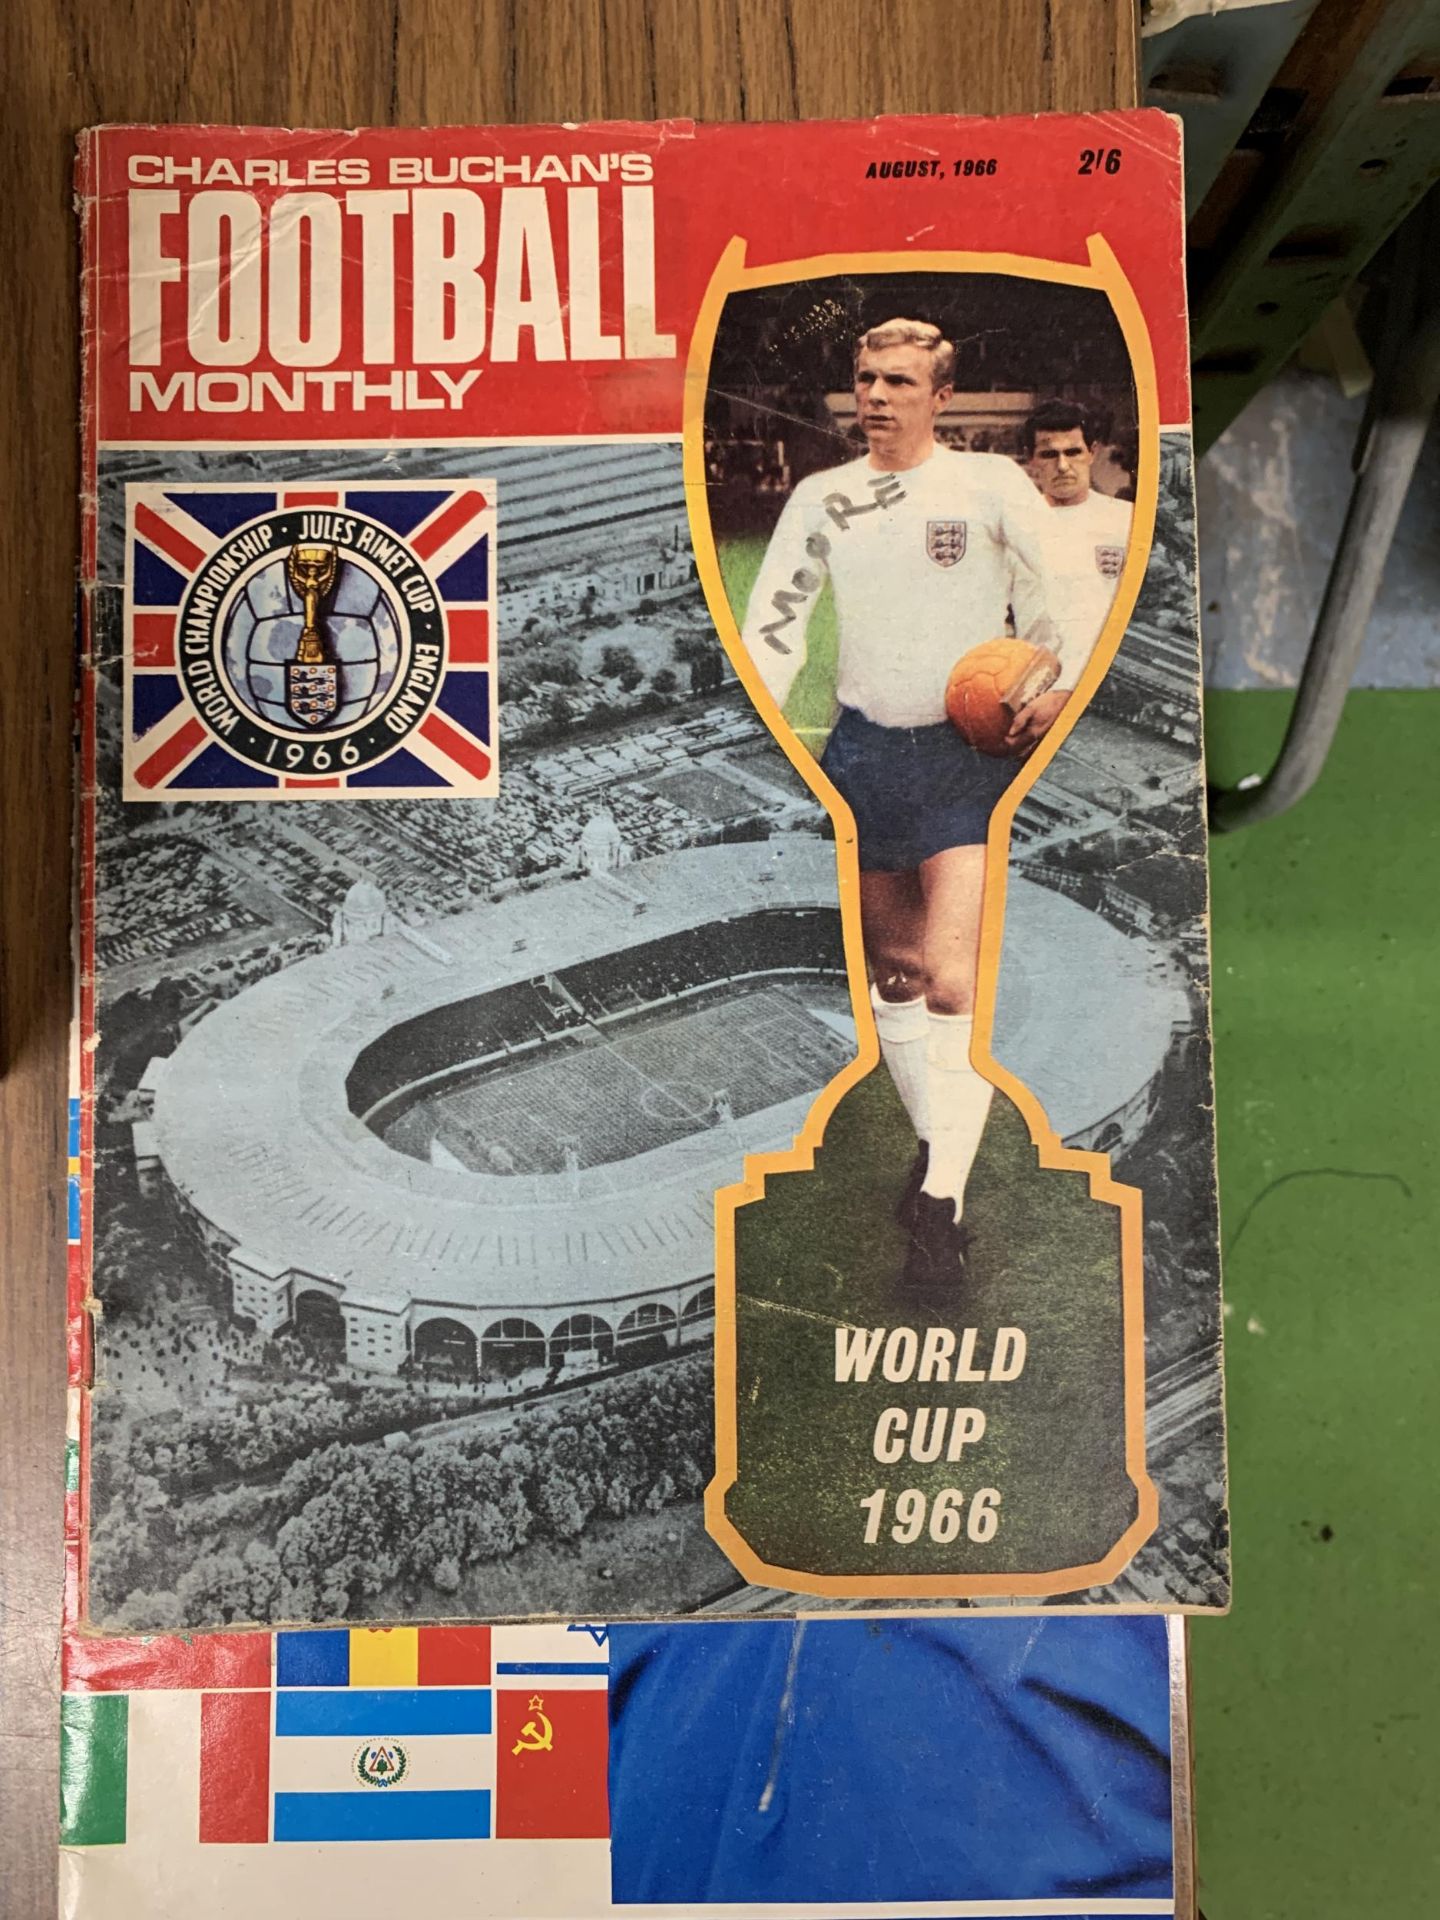 THREE 1966 WORLD CUP MAGAZINES TO INCLUDE PARK DRIVE, CHARLES BUCHAN AND MONTHLY FOOTBALL - Bild 2 aus 4